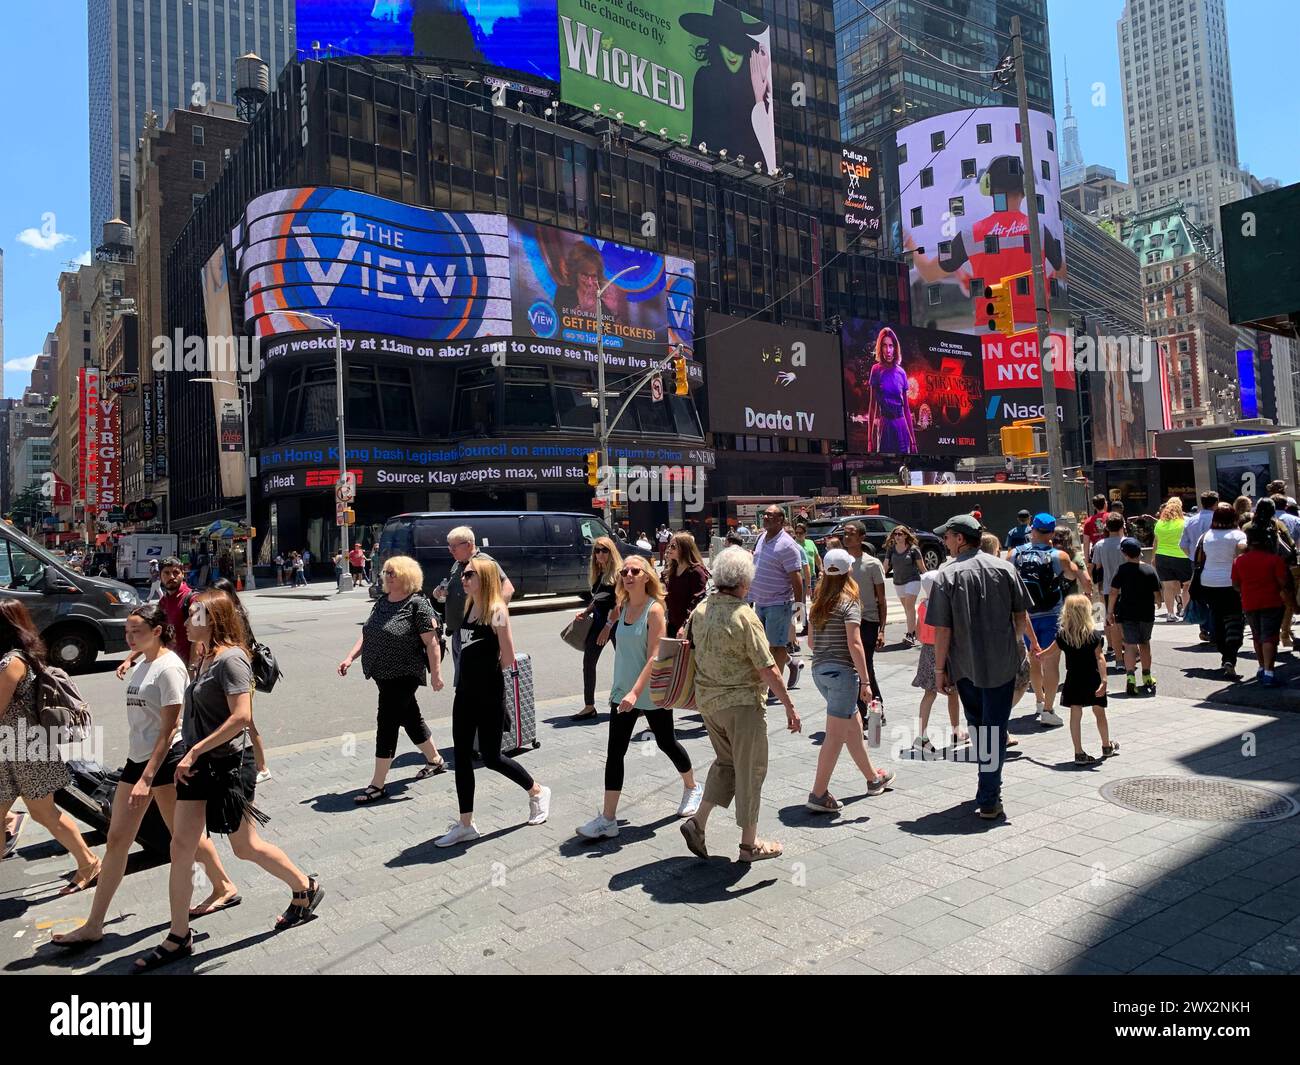 A crowd of people cross the street in the heart of New York City Times Square, surrounded by the billboards and advertisements Stock Photo